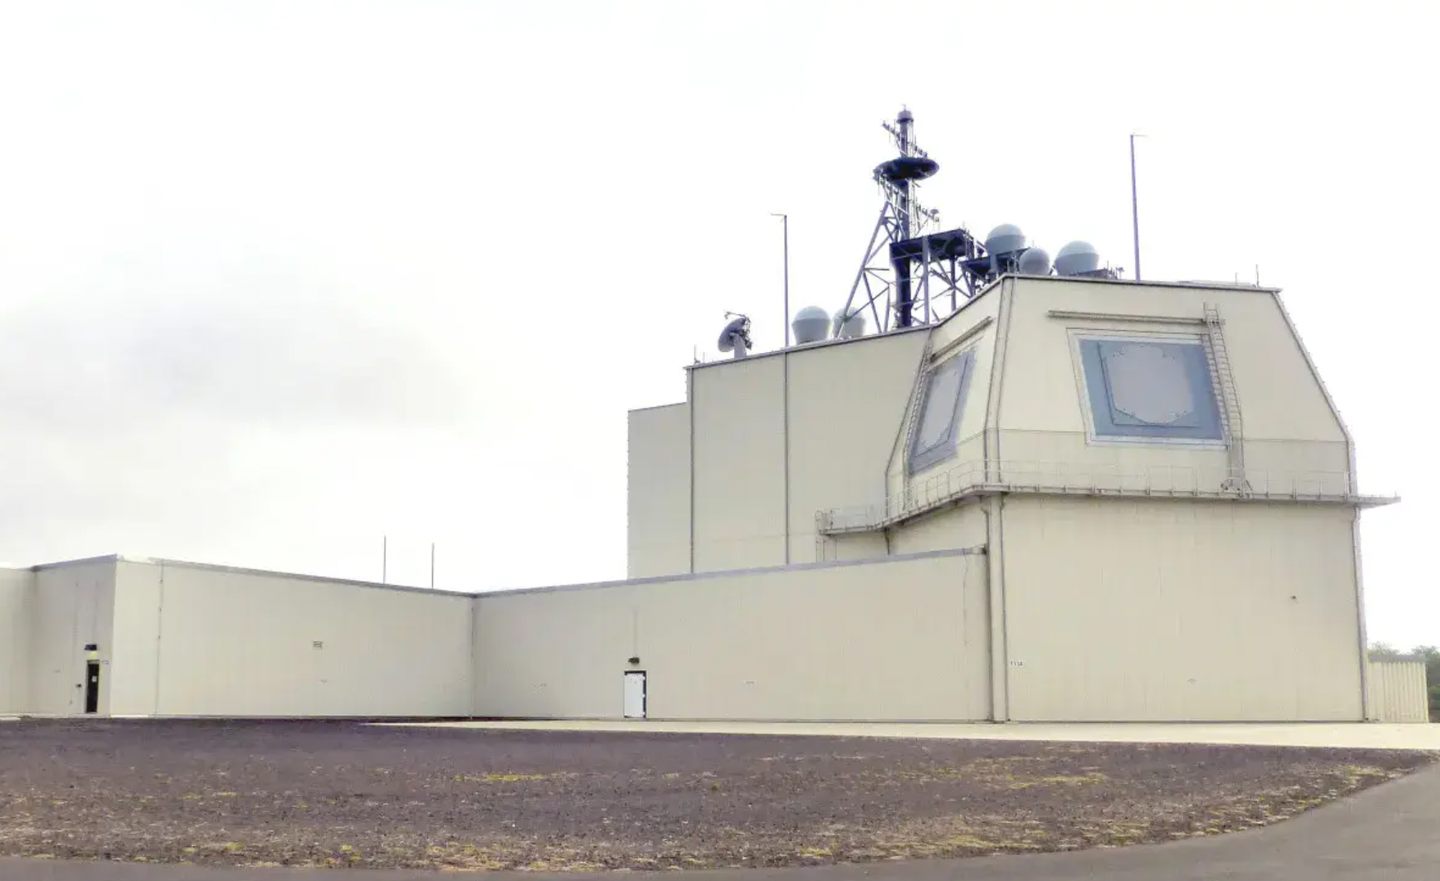 The main control center at the U.S. military’s Aegis Ashore missile defense test complex in Kauai, Hawaii. Japan’s Aegis Ashore sites were expected to be of a similar design, but with the Lockheed Martin AN/SPY-7 radar instead of the AN/SPY-1 seen here.&nbsp;<em>Kyodo via AP Images</em>